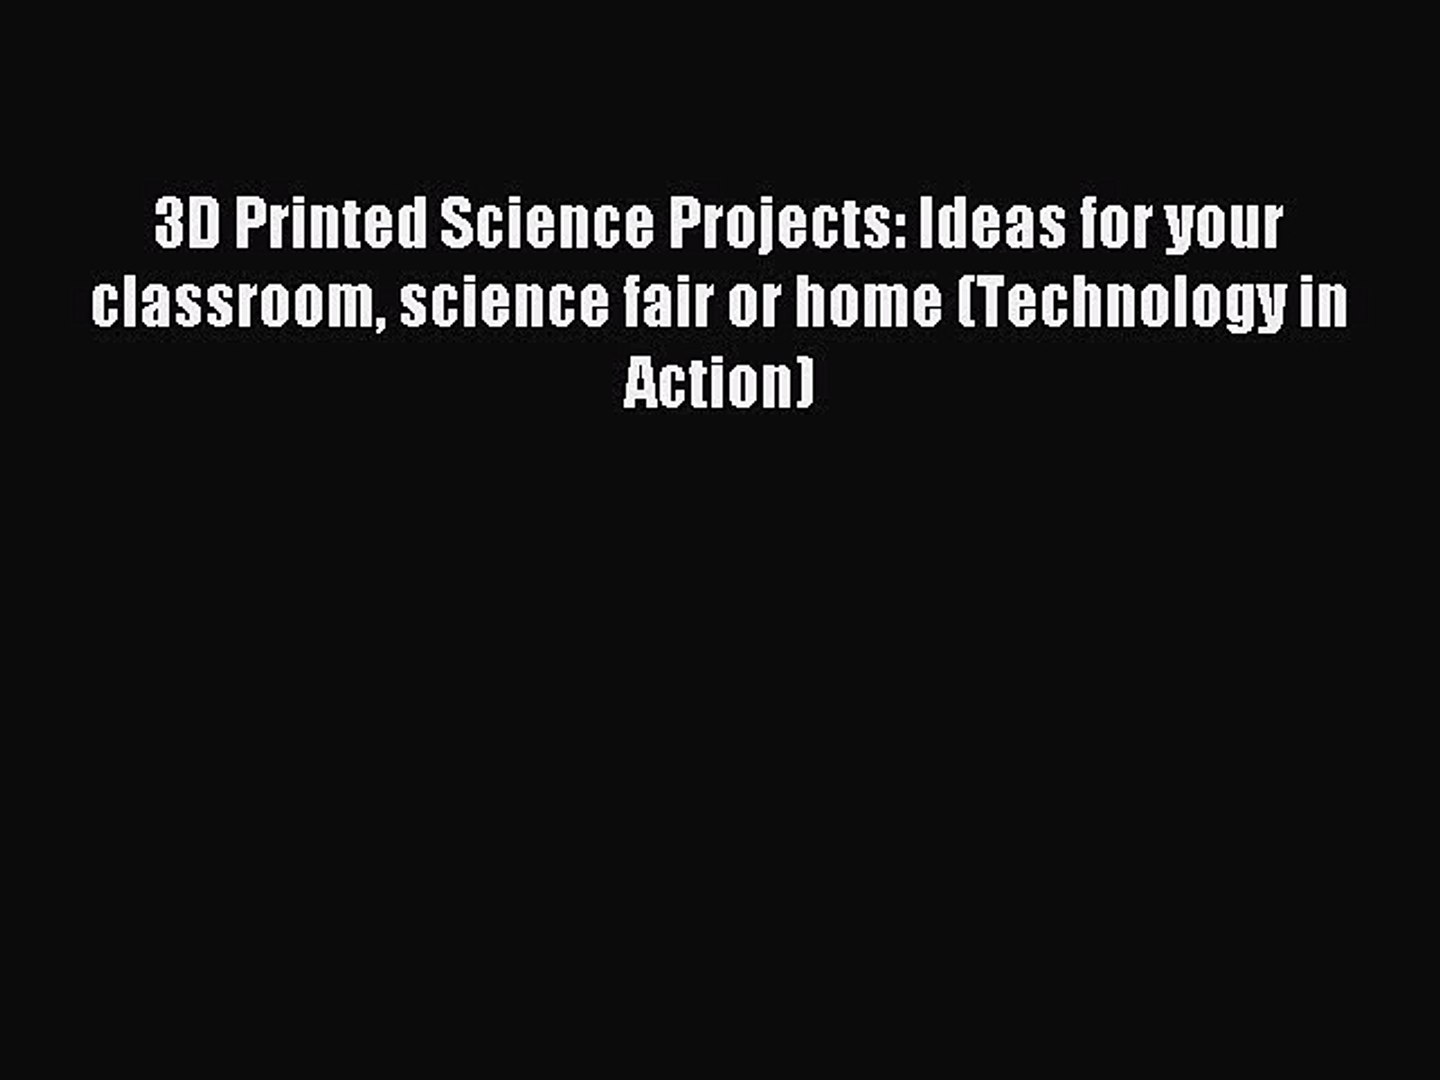 Download 3D Printed Science Projects: Ideas for your classroom science fair or home (Technology